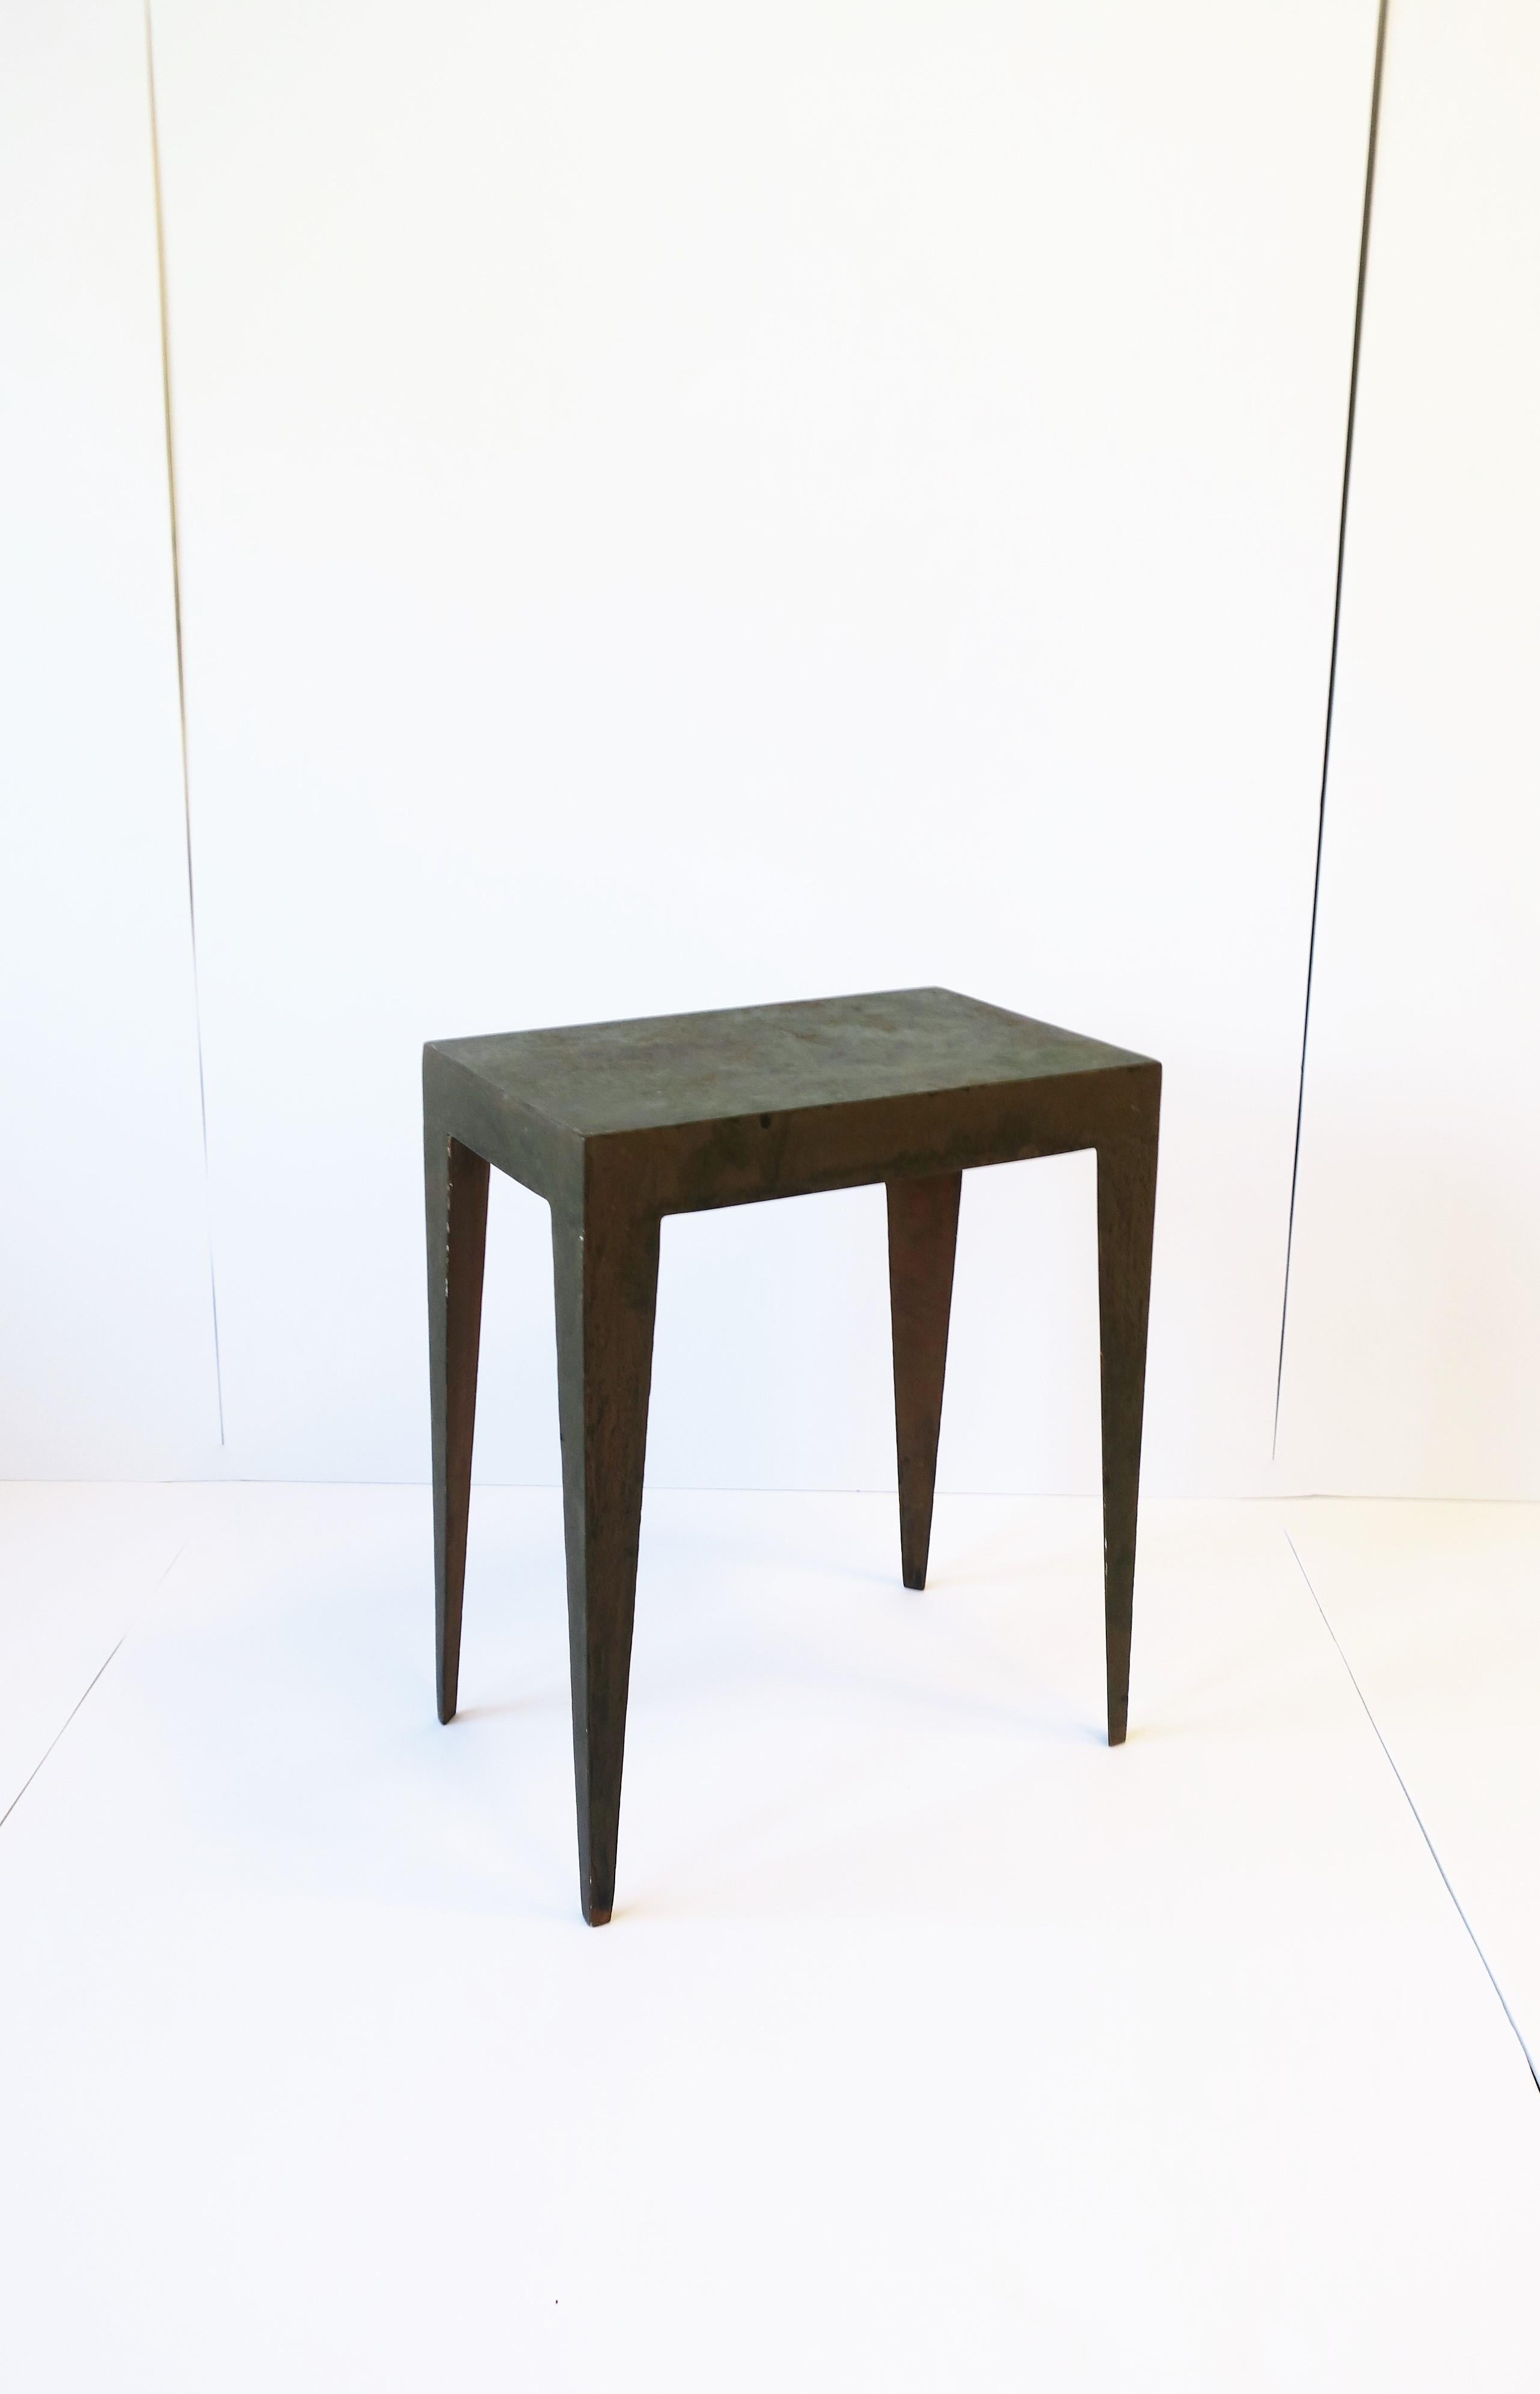 An Industrial / Minimalist metal side or end table with European Deco influence in legs. Table has an intentional weathered surface. Table is a convenient size. Dimensions: 8.38